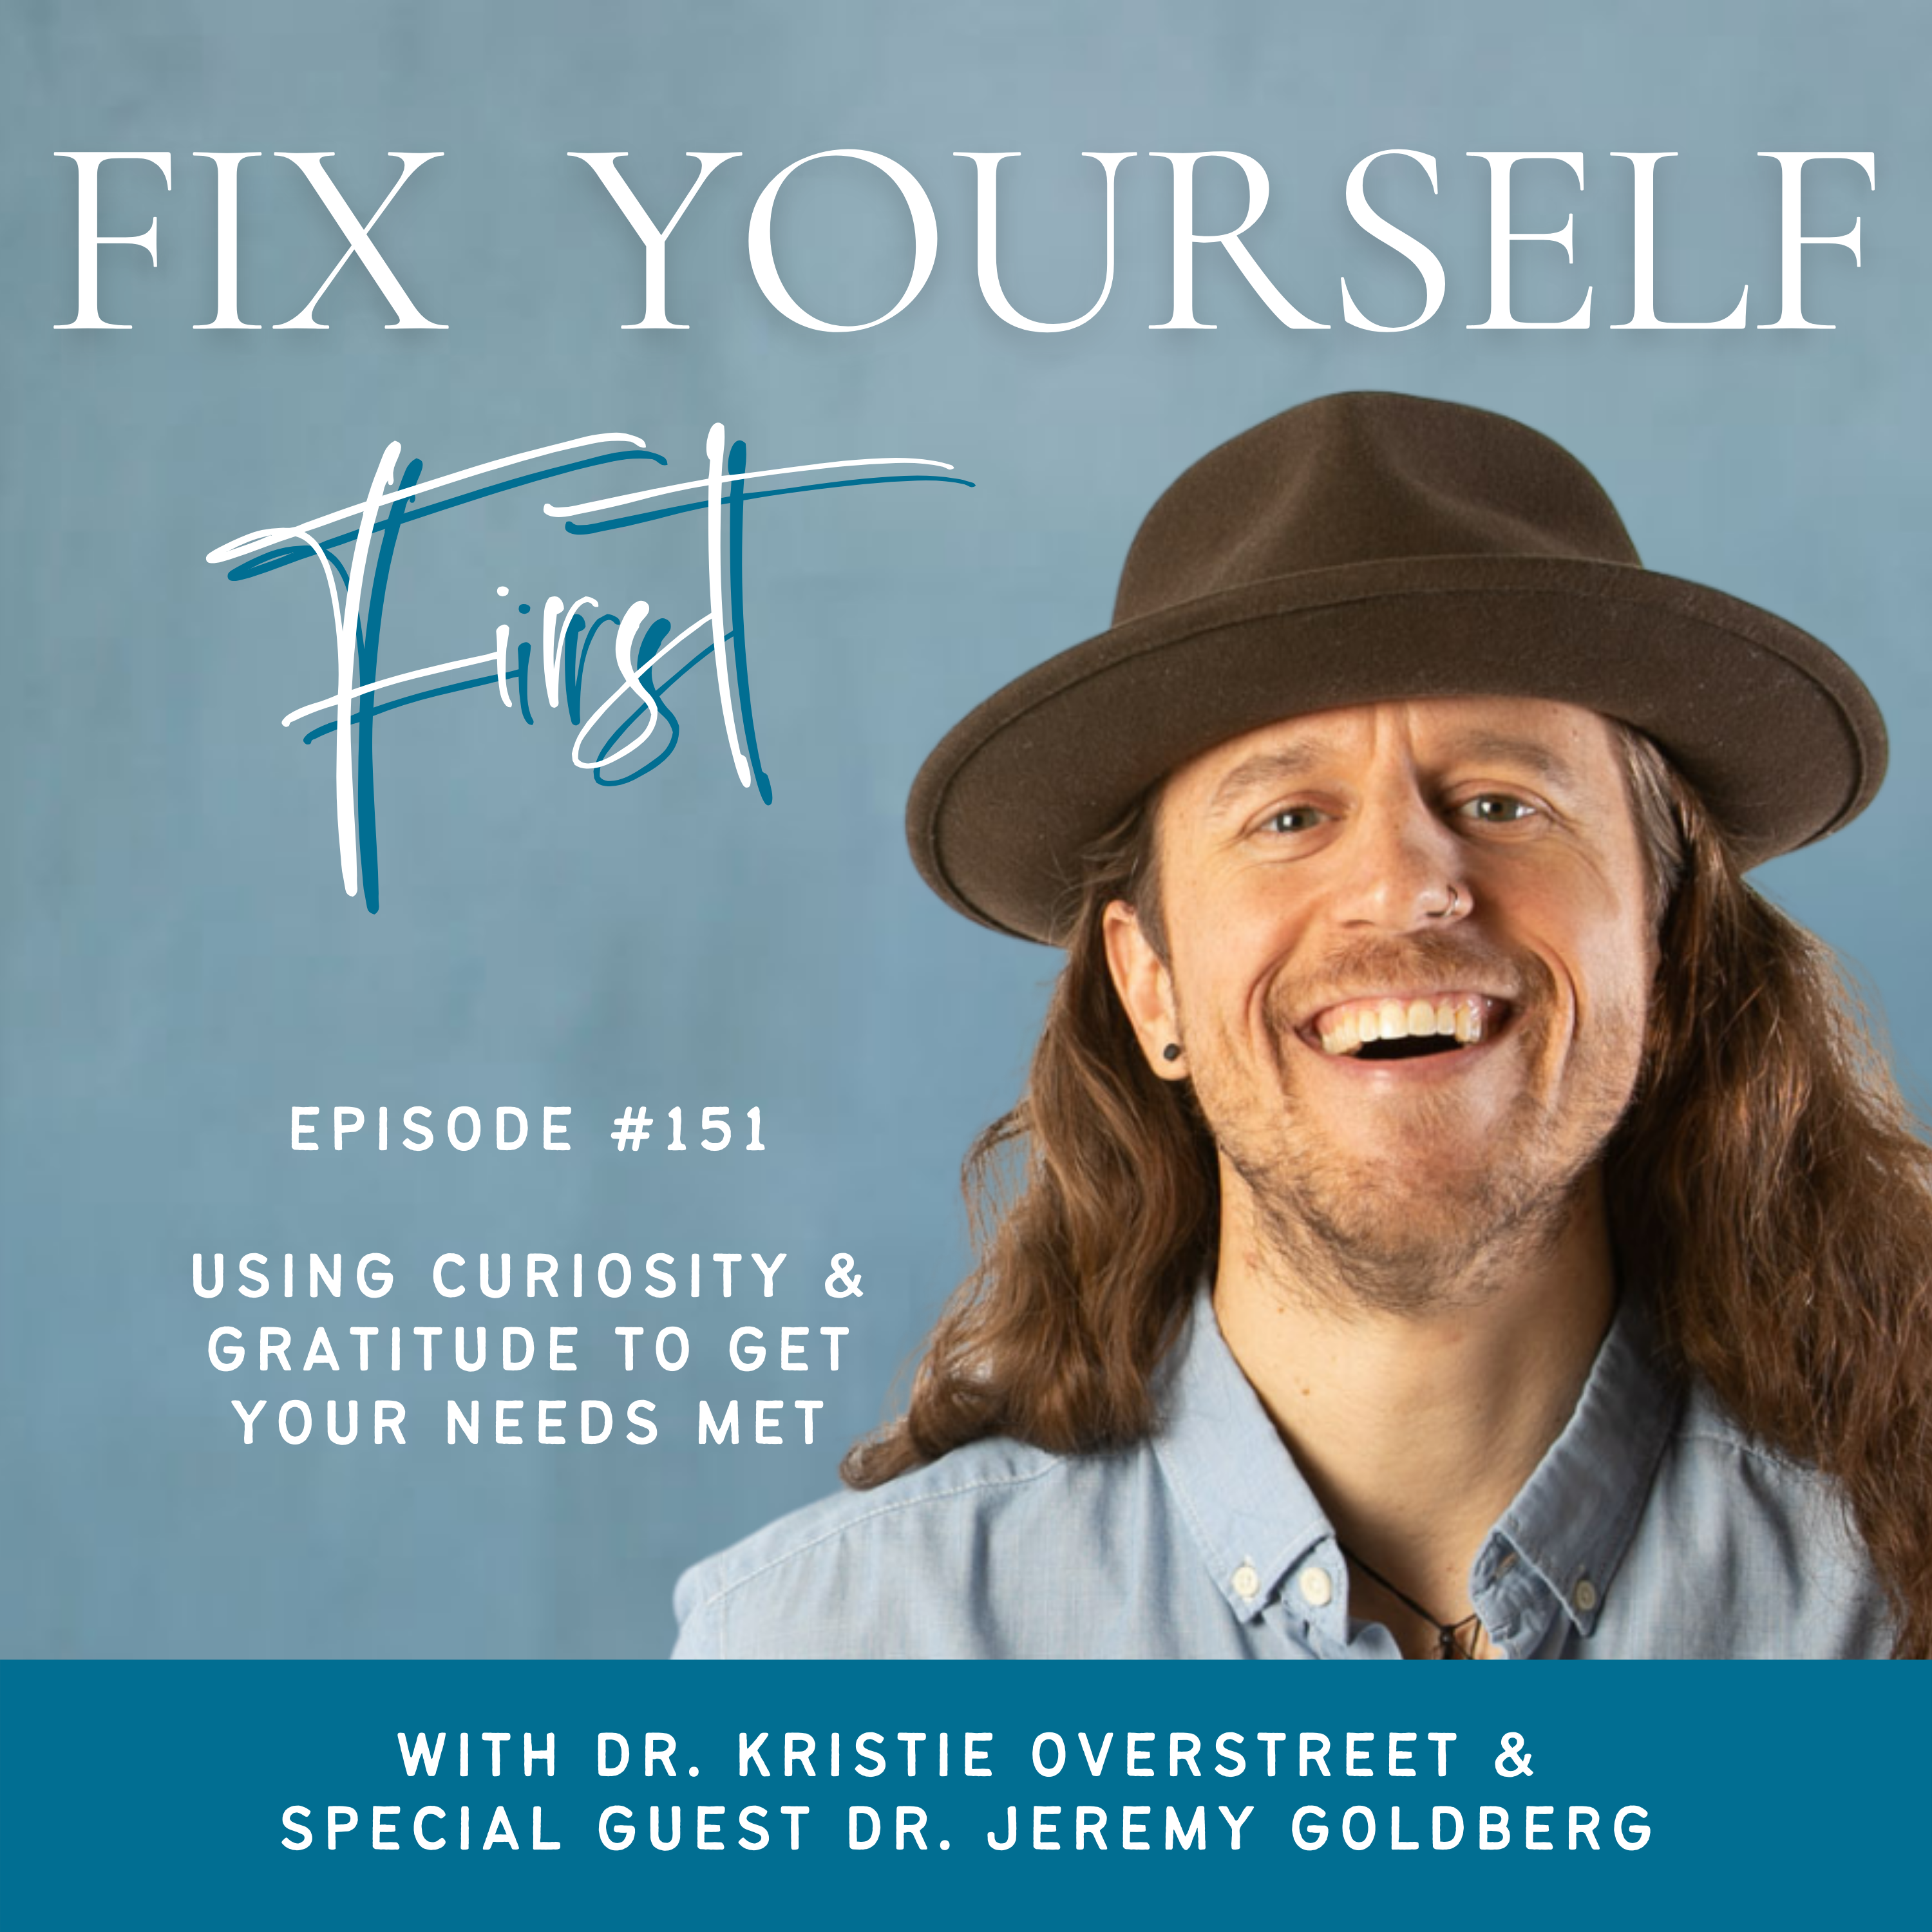 Fix Yourself First Episode 151 Using Curiosity & Gratitude to Get Your Needs Met with Dr. Jeremy Goldberg